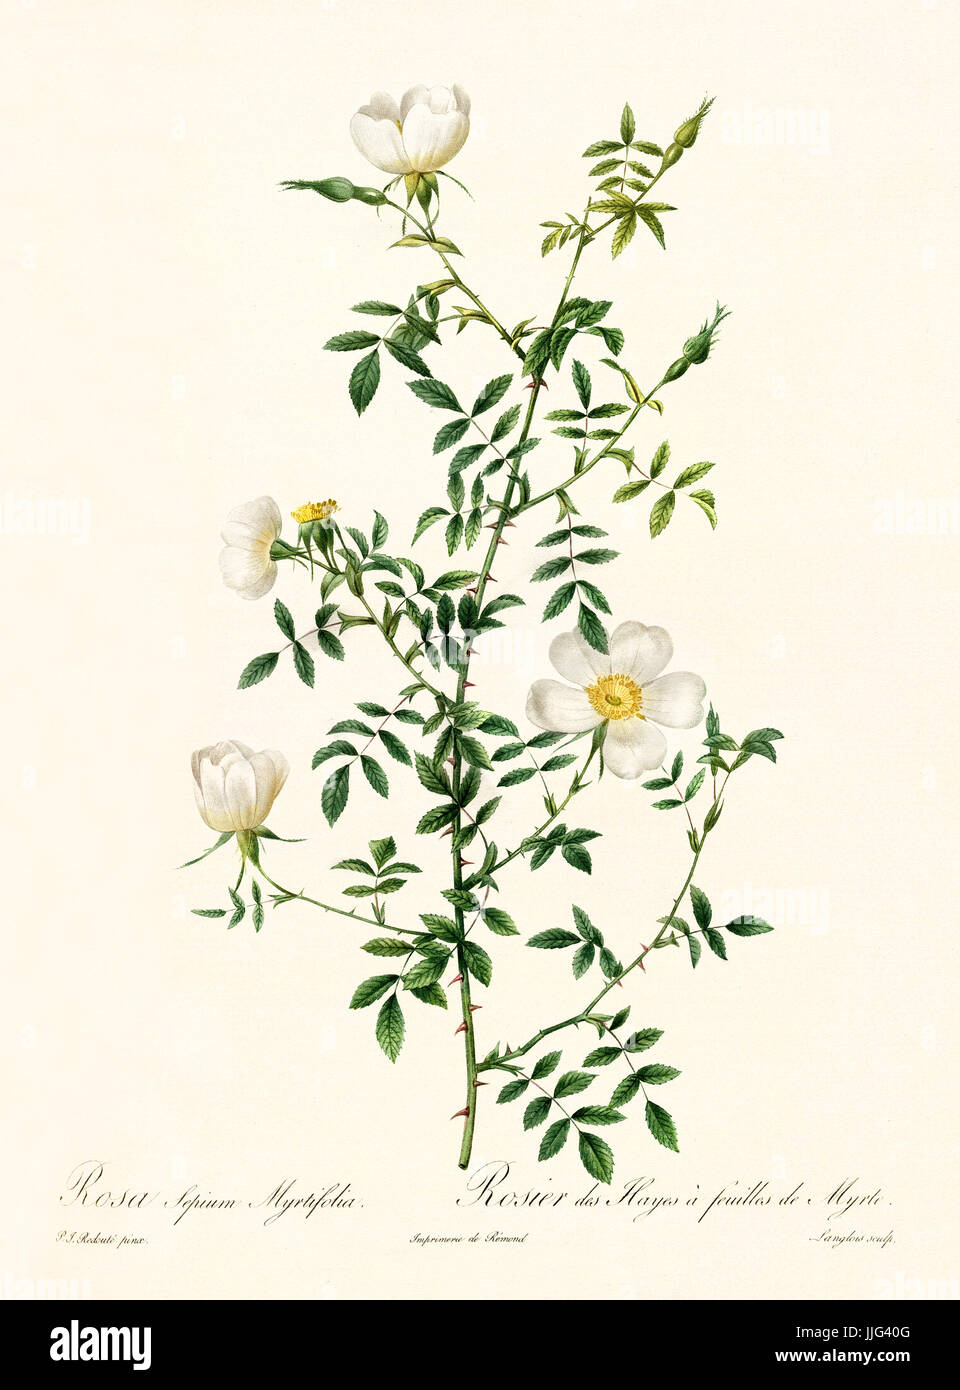 Old illustration of Rosa sepium myrtifolia. Created by P. R. Redoute, published on Les Roses, Imp. Firmin Didot, Paris, 1817-24 Stock Photo